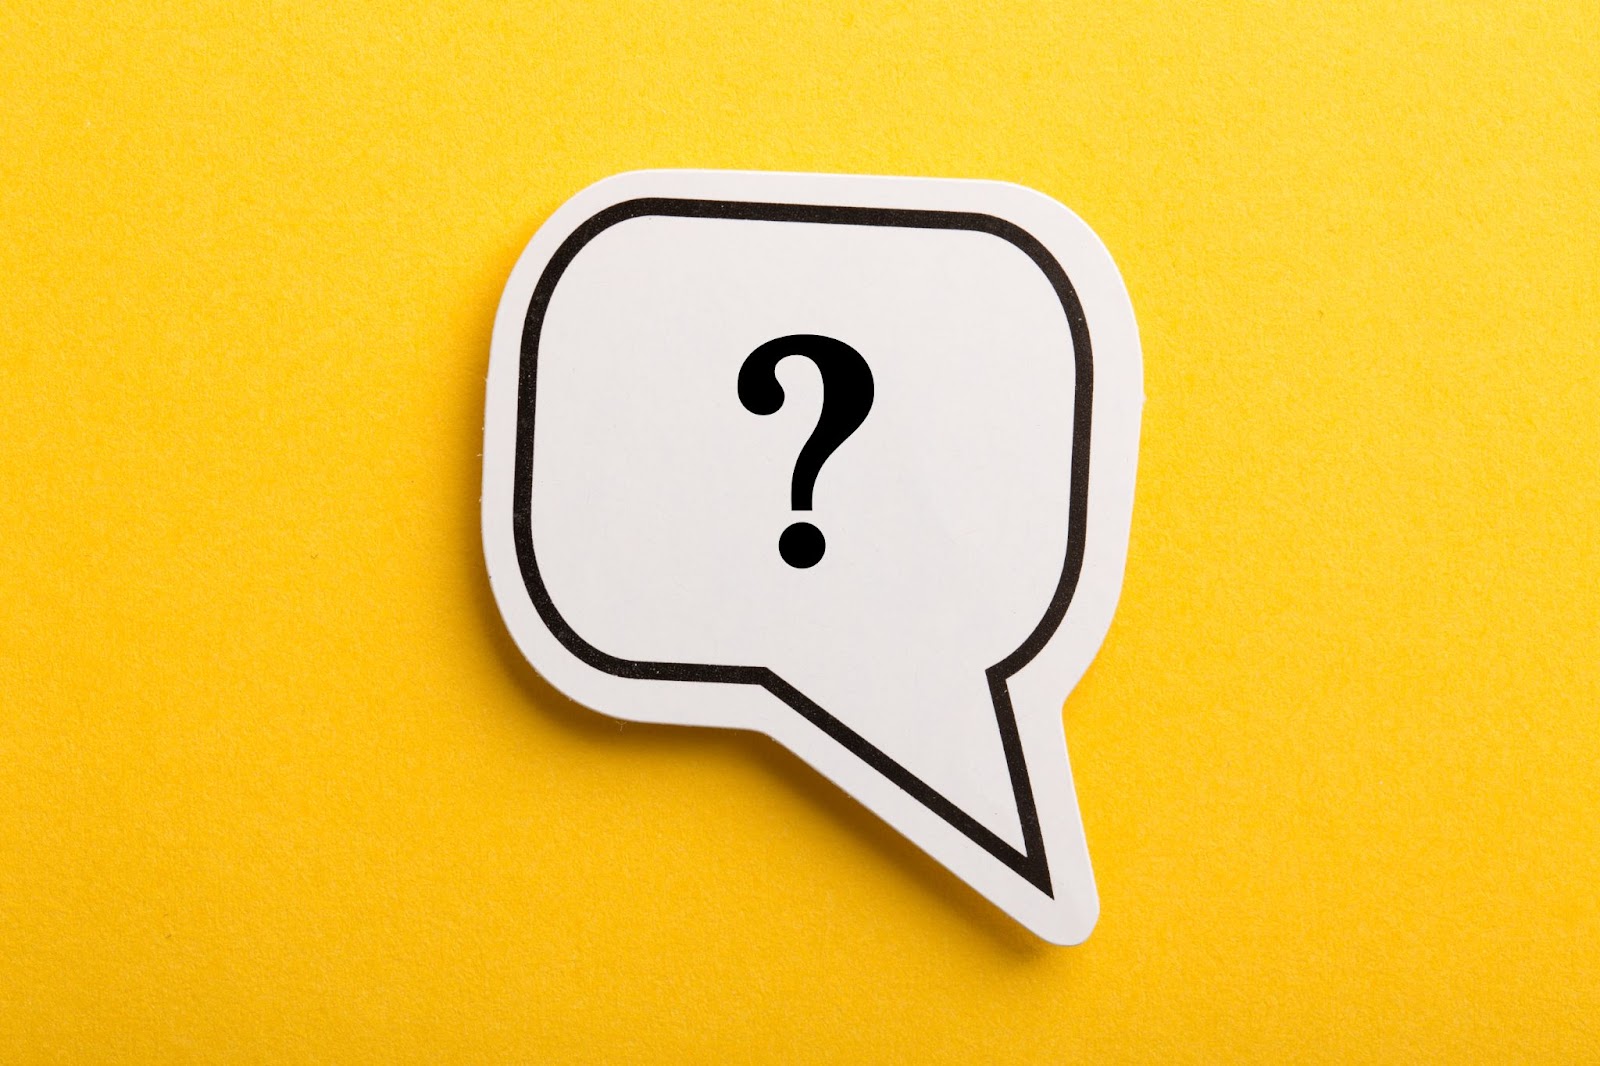 A question mark hovering about a bright yellow background.